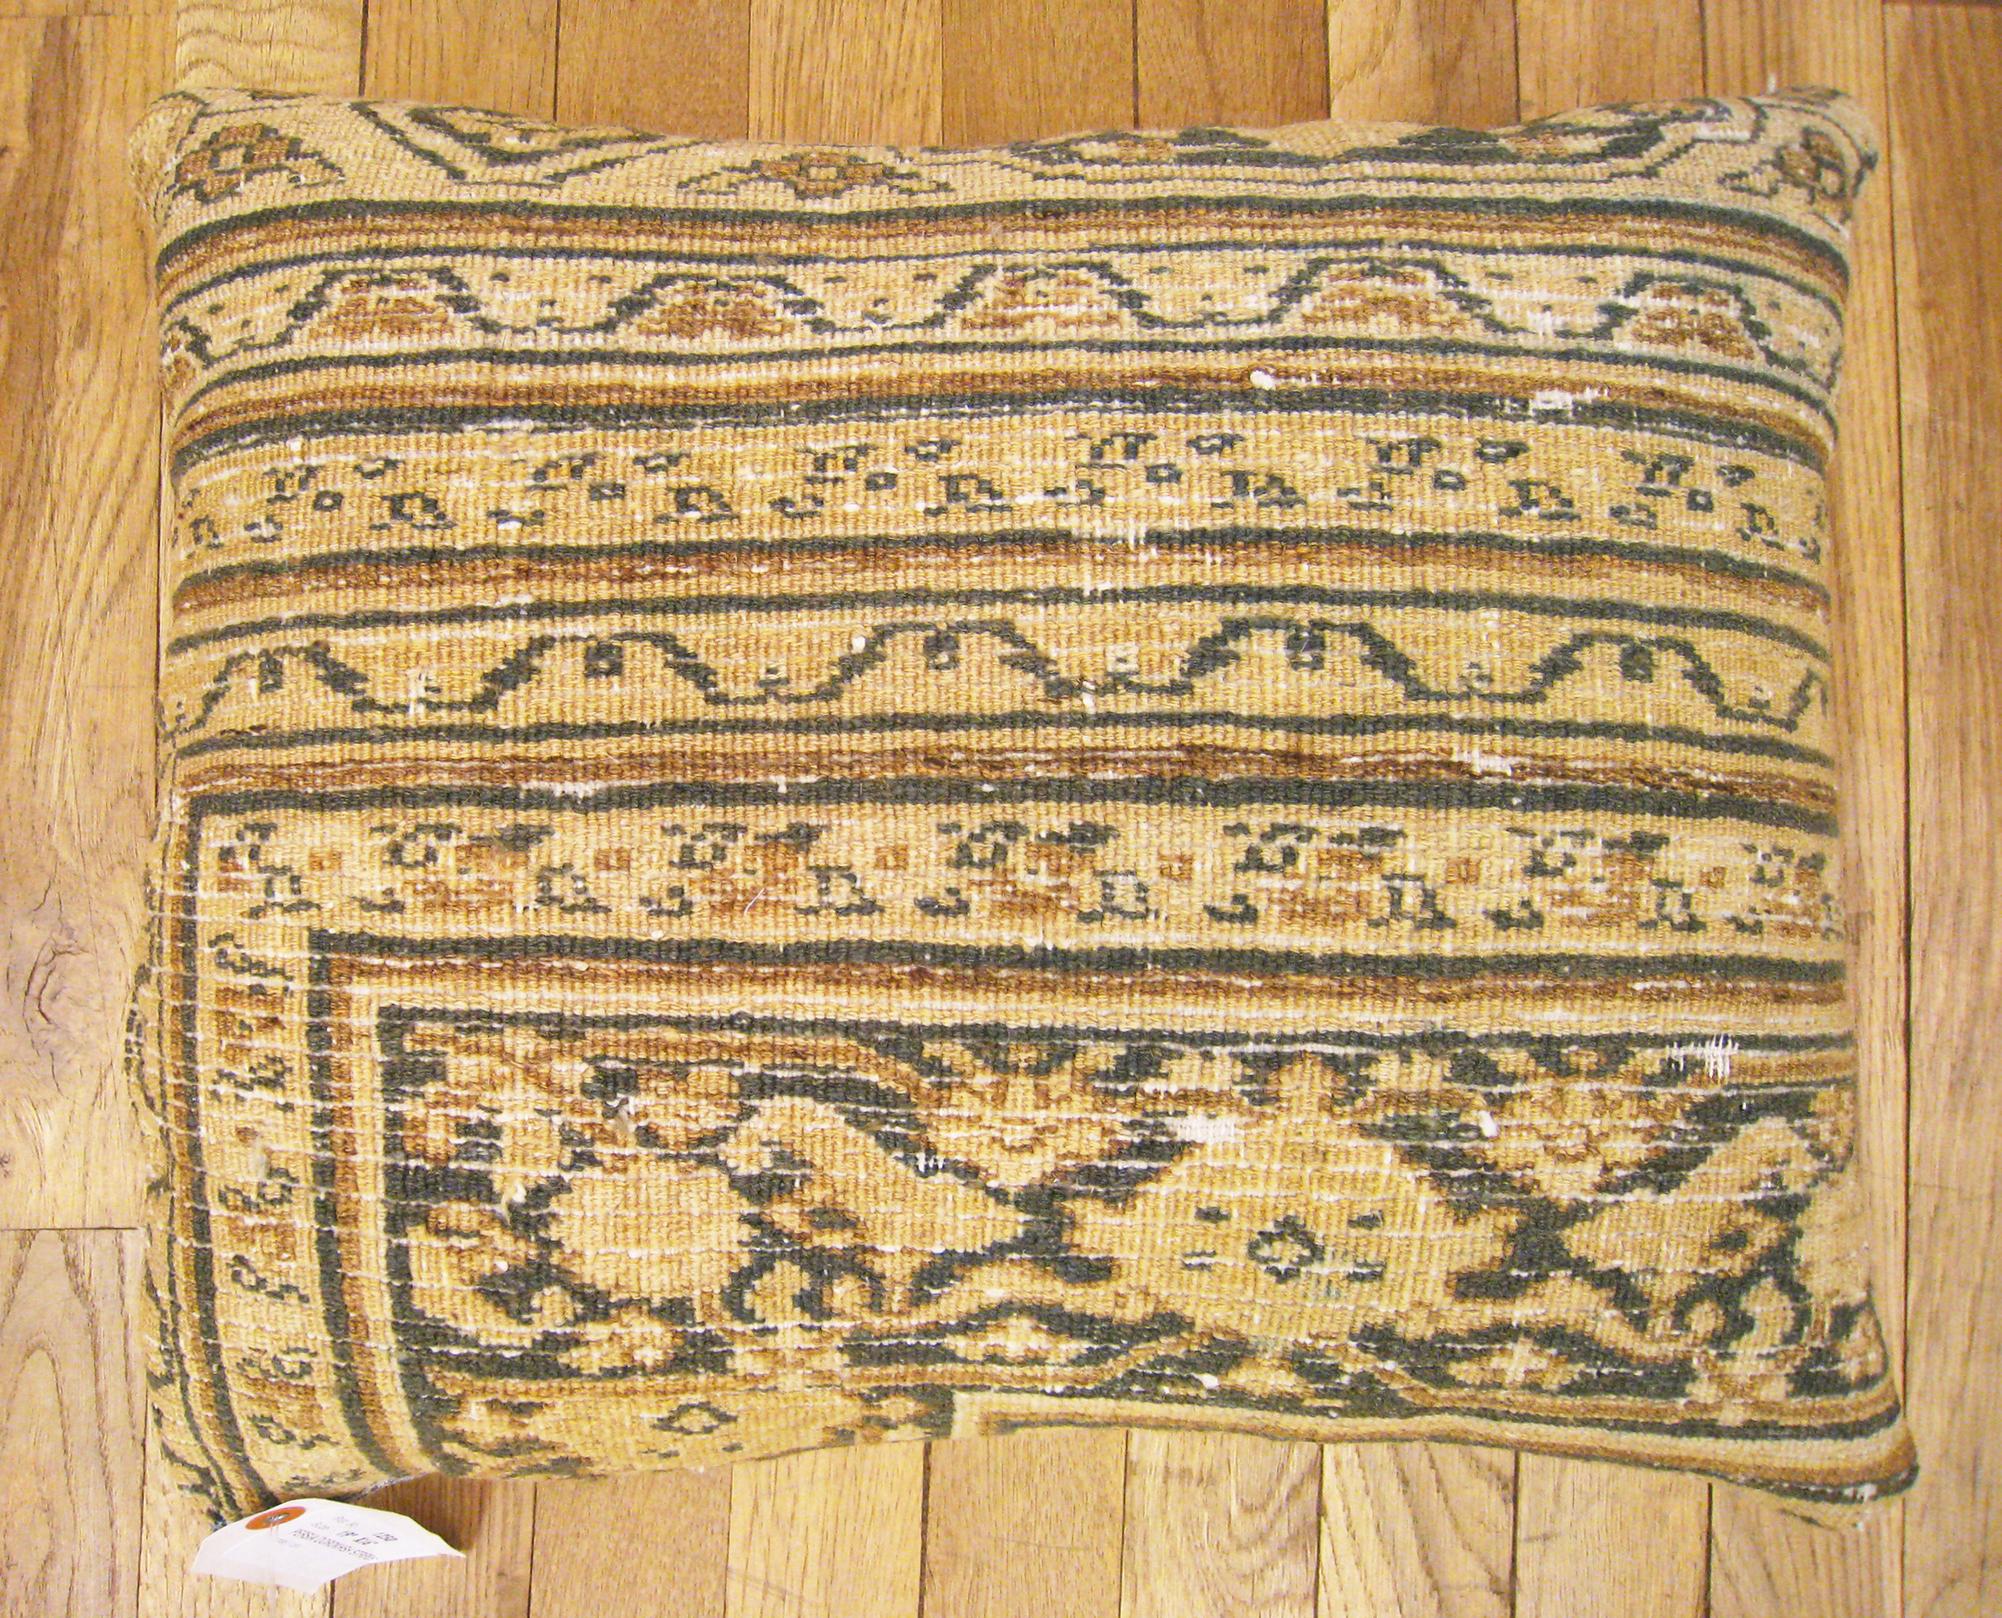 A lovely decorative pillow fronted by a segment of an antique Persian Dorokhsh carpet, and backed with an ivory colored striped fabric, in the size 19